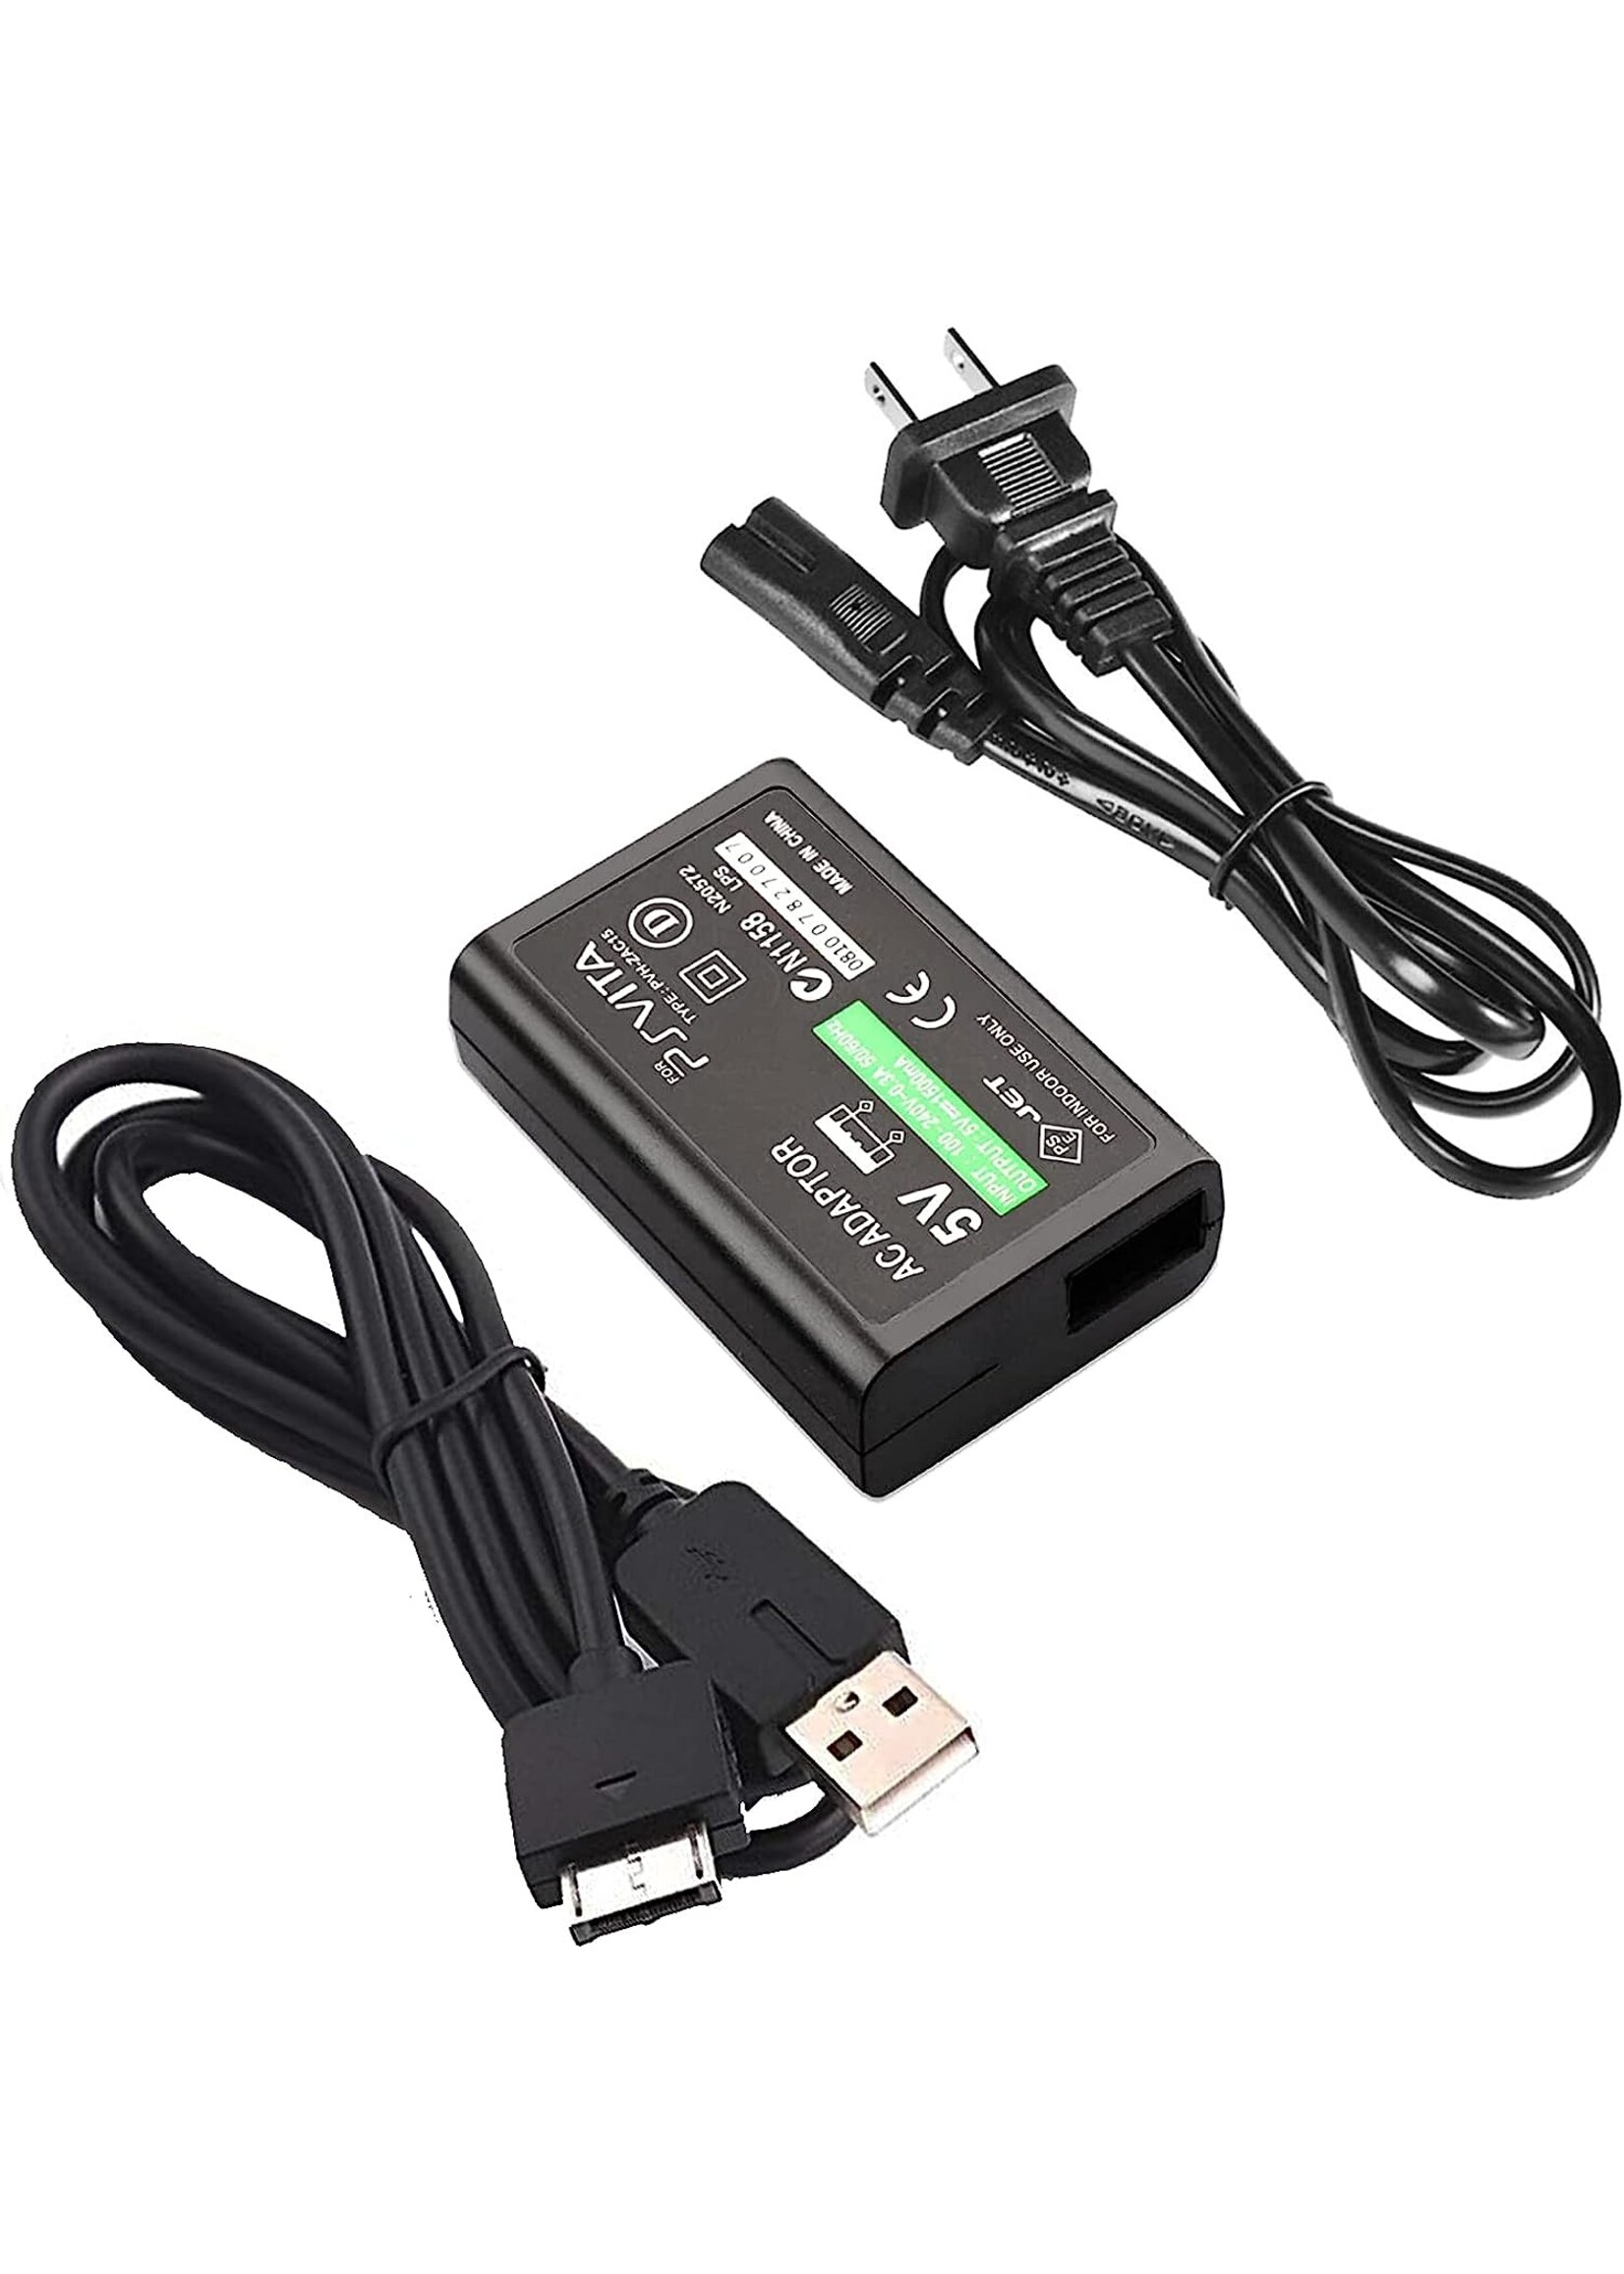 PS VITA AC Adaptor Charger (Model 2000 ONLY)